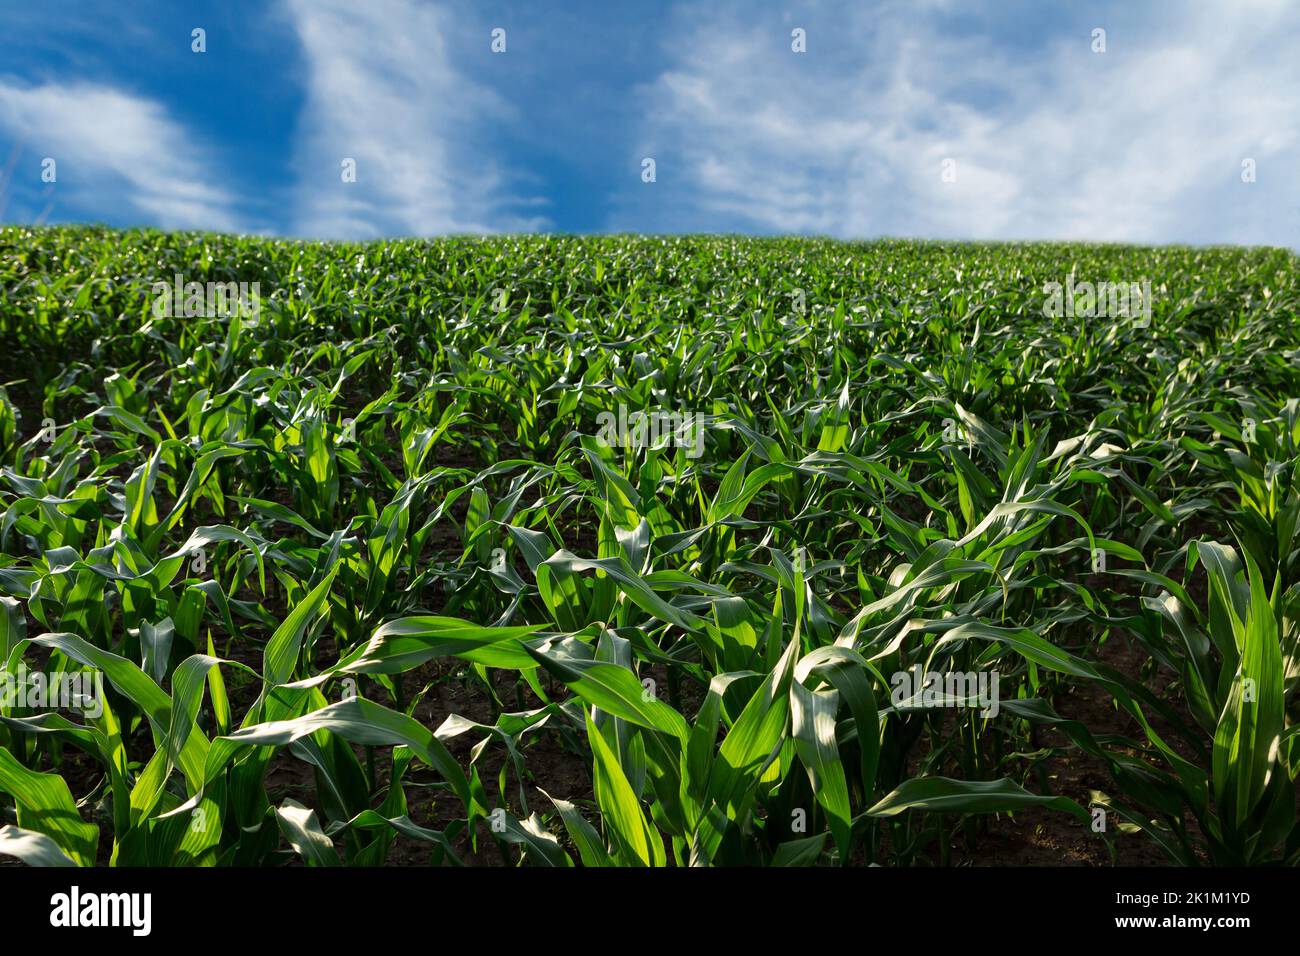 Green landscape with young corn plants Stock Photo